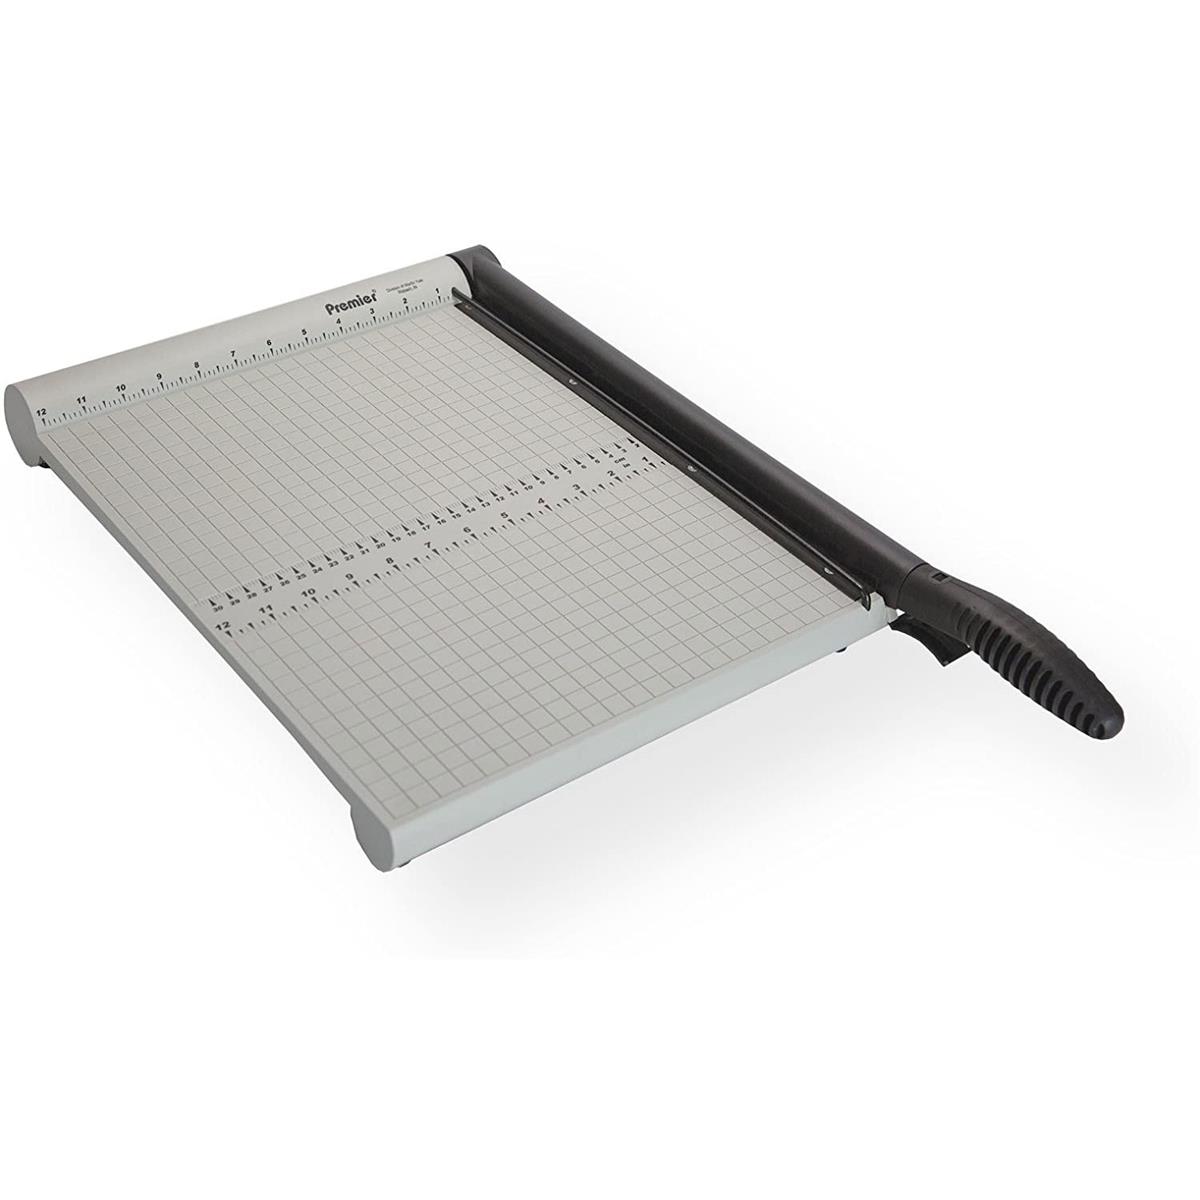 

Premier 15" Guillotine Style Paper Cutter/Trimmer